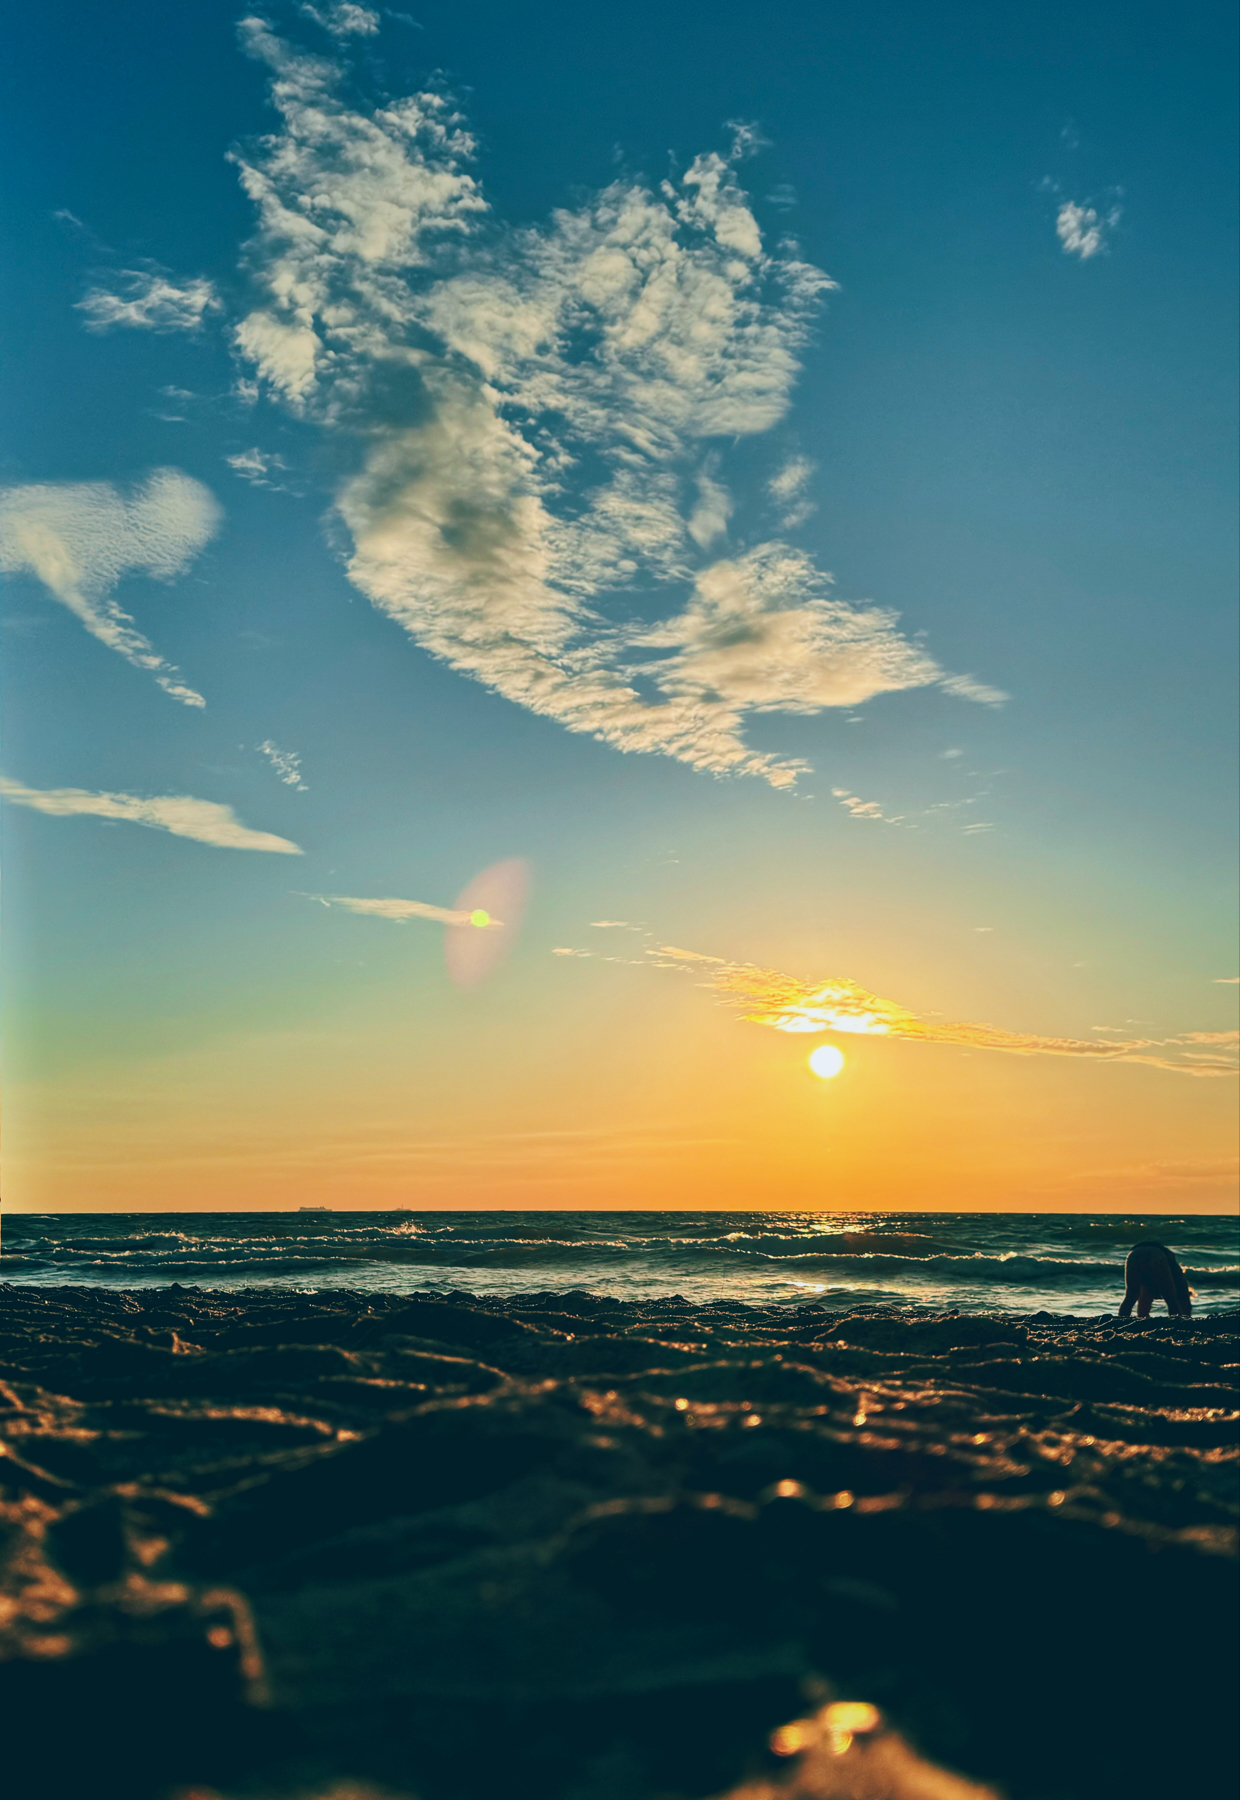 Beach scene at sunset with the sun low on the horizon, a person bending down near the water, and scattered clouds in the sky. Waves gently roll onto the shore, with golden light reflecting off the water and wet sand.